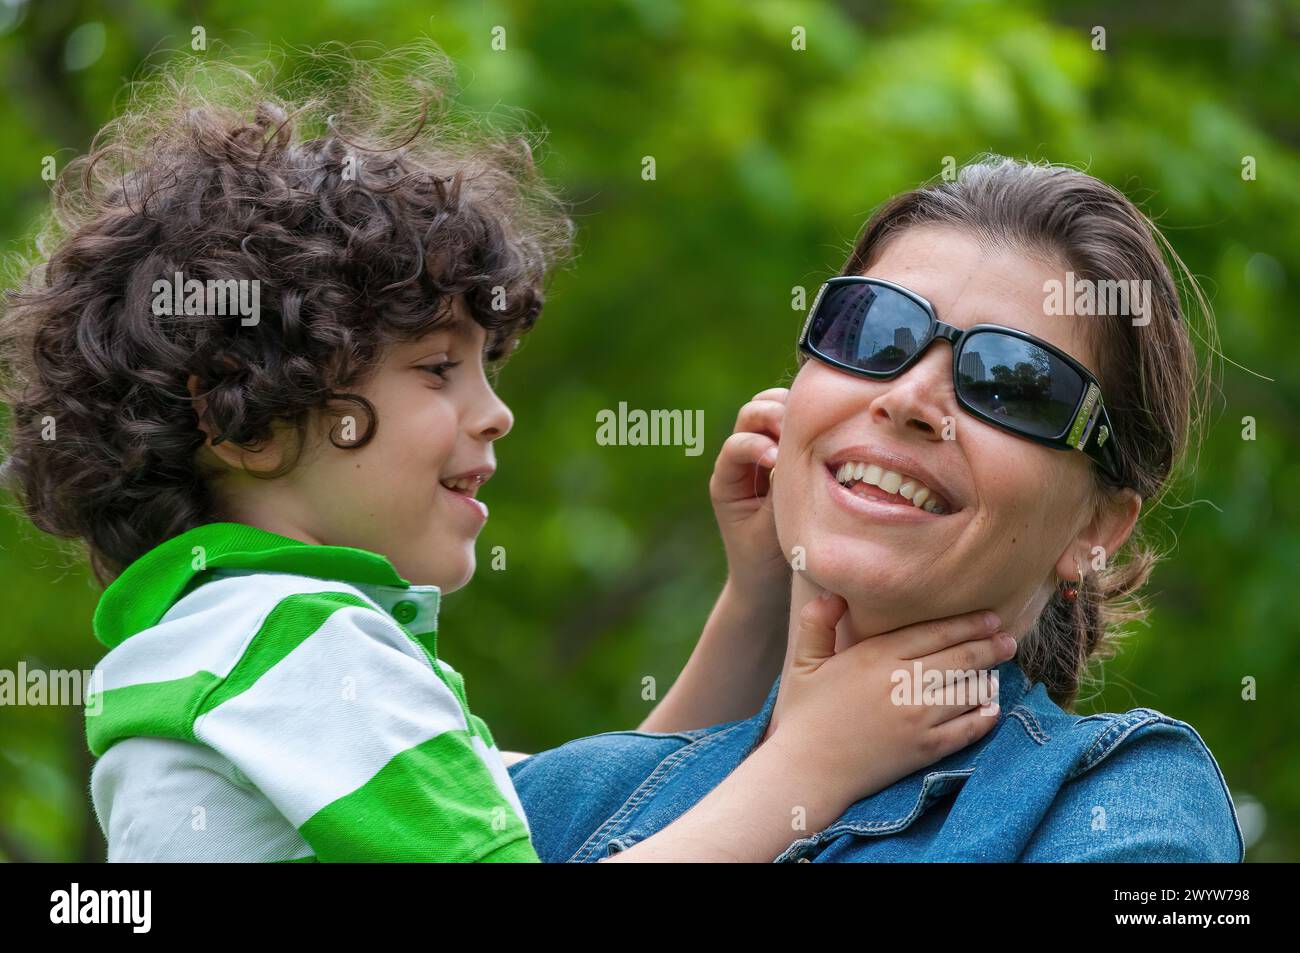 portrait of latin american family, mother and child son Stock Photo